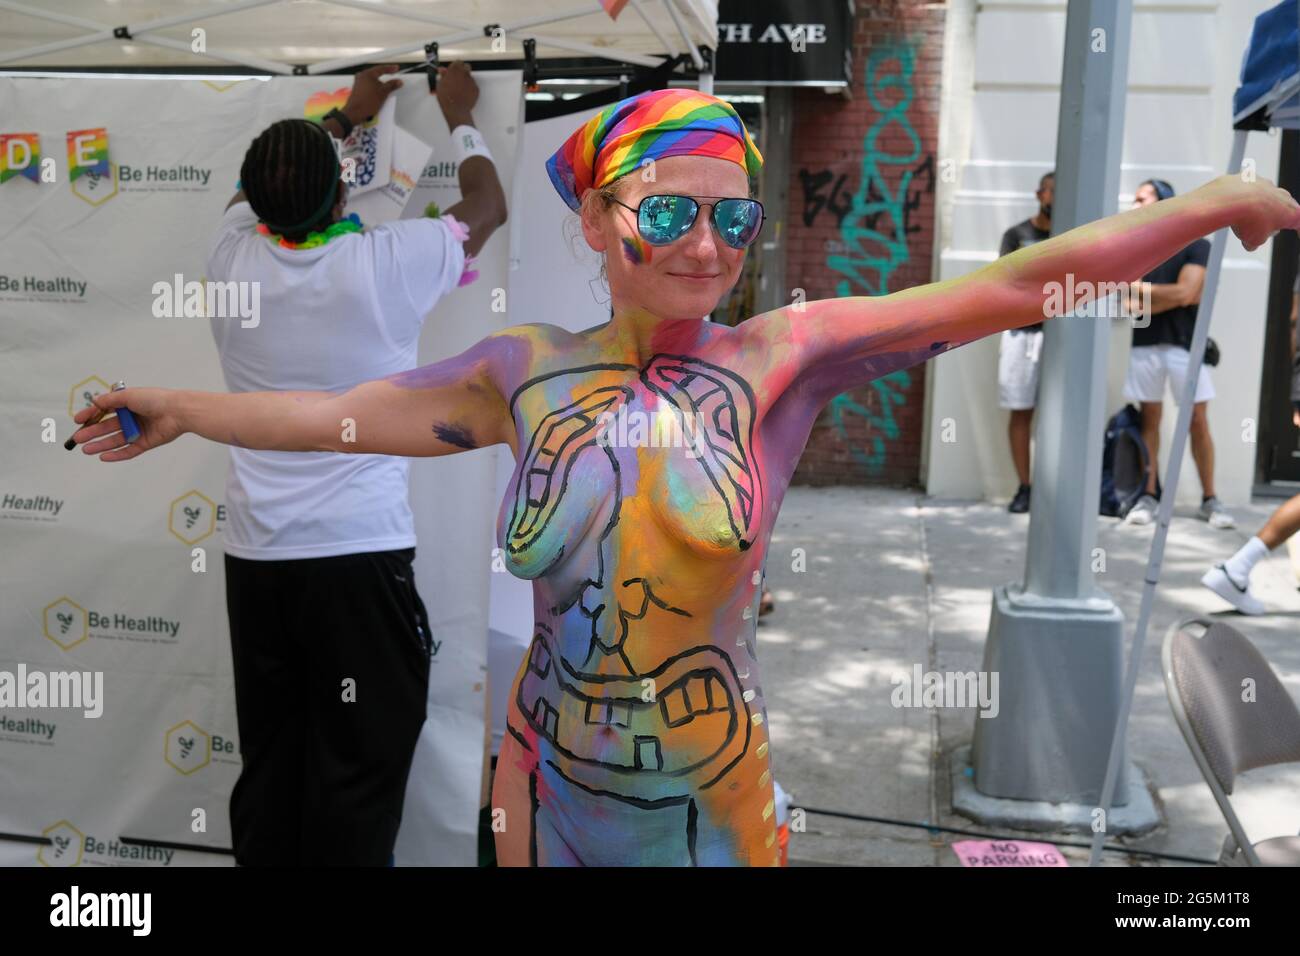 New York, New York, USA. 27th June, 2021. Celebrating Gay Pride the NYC PrideFest festival brought out the pride in thousands of people through dance, music, food, speeches, and marches in the blocks below Union Square. Credit: Milo Hess/ZUMA Wire/Alamy Live News Stock Photo